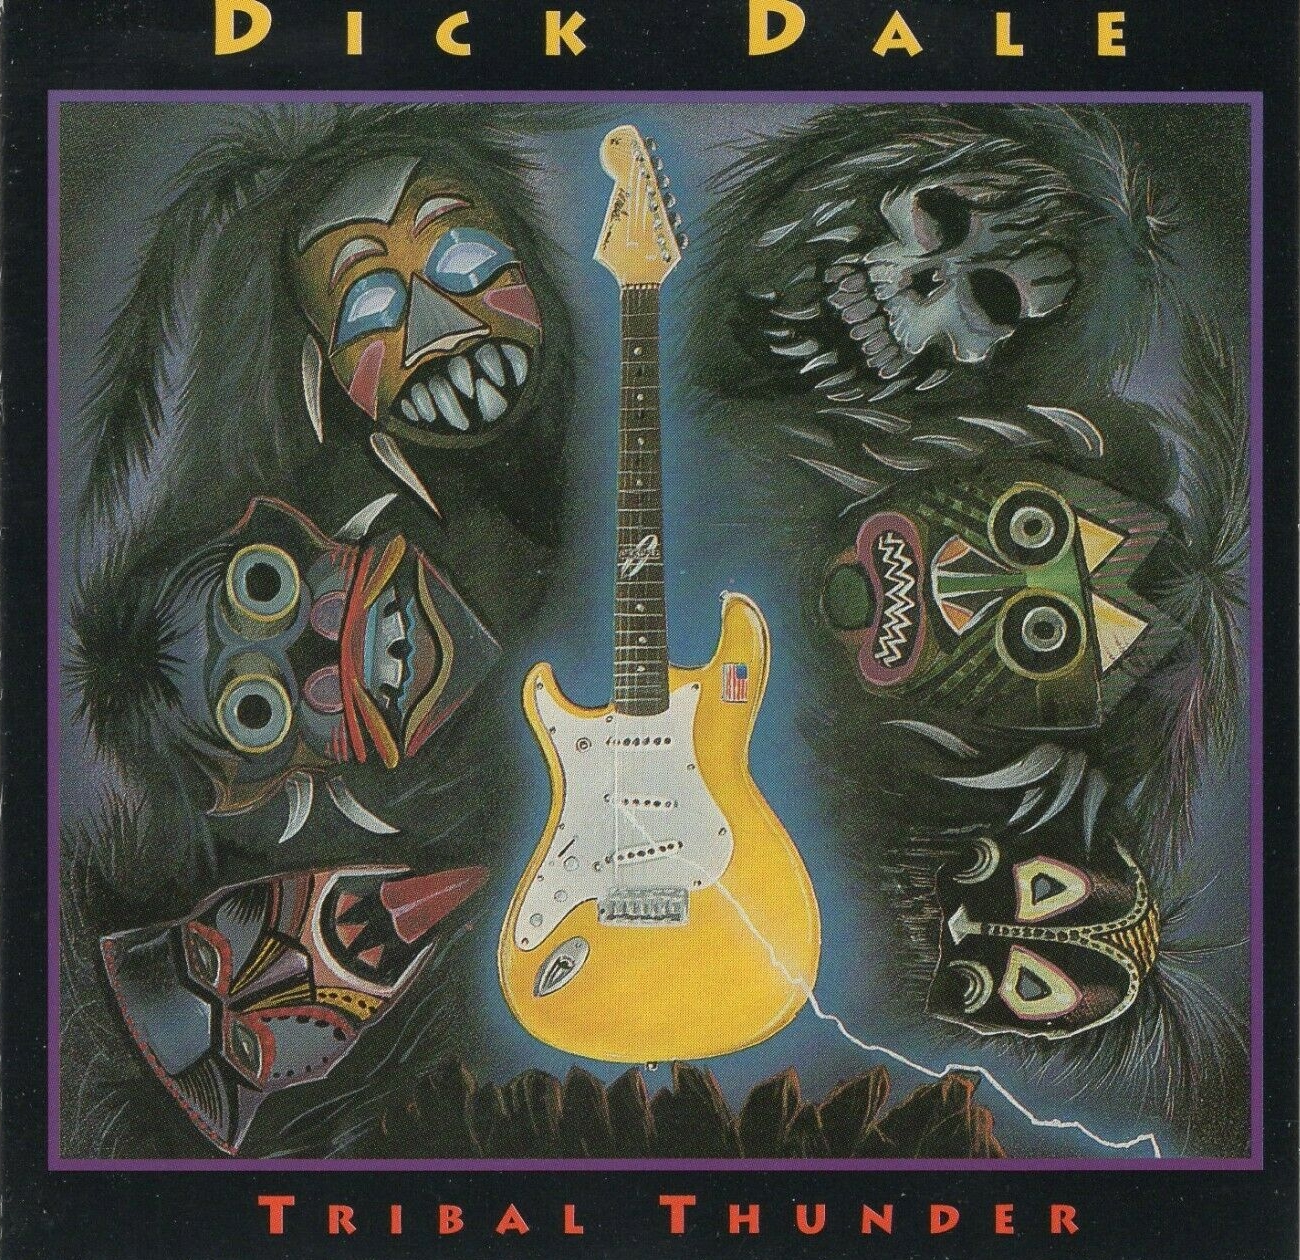 Art for The Eliminator by Dick Dale